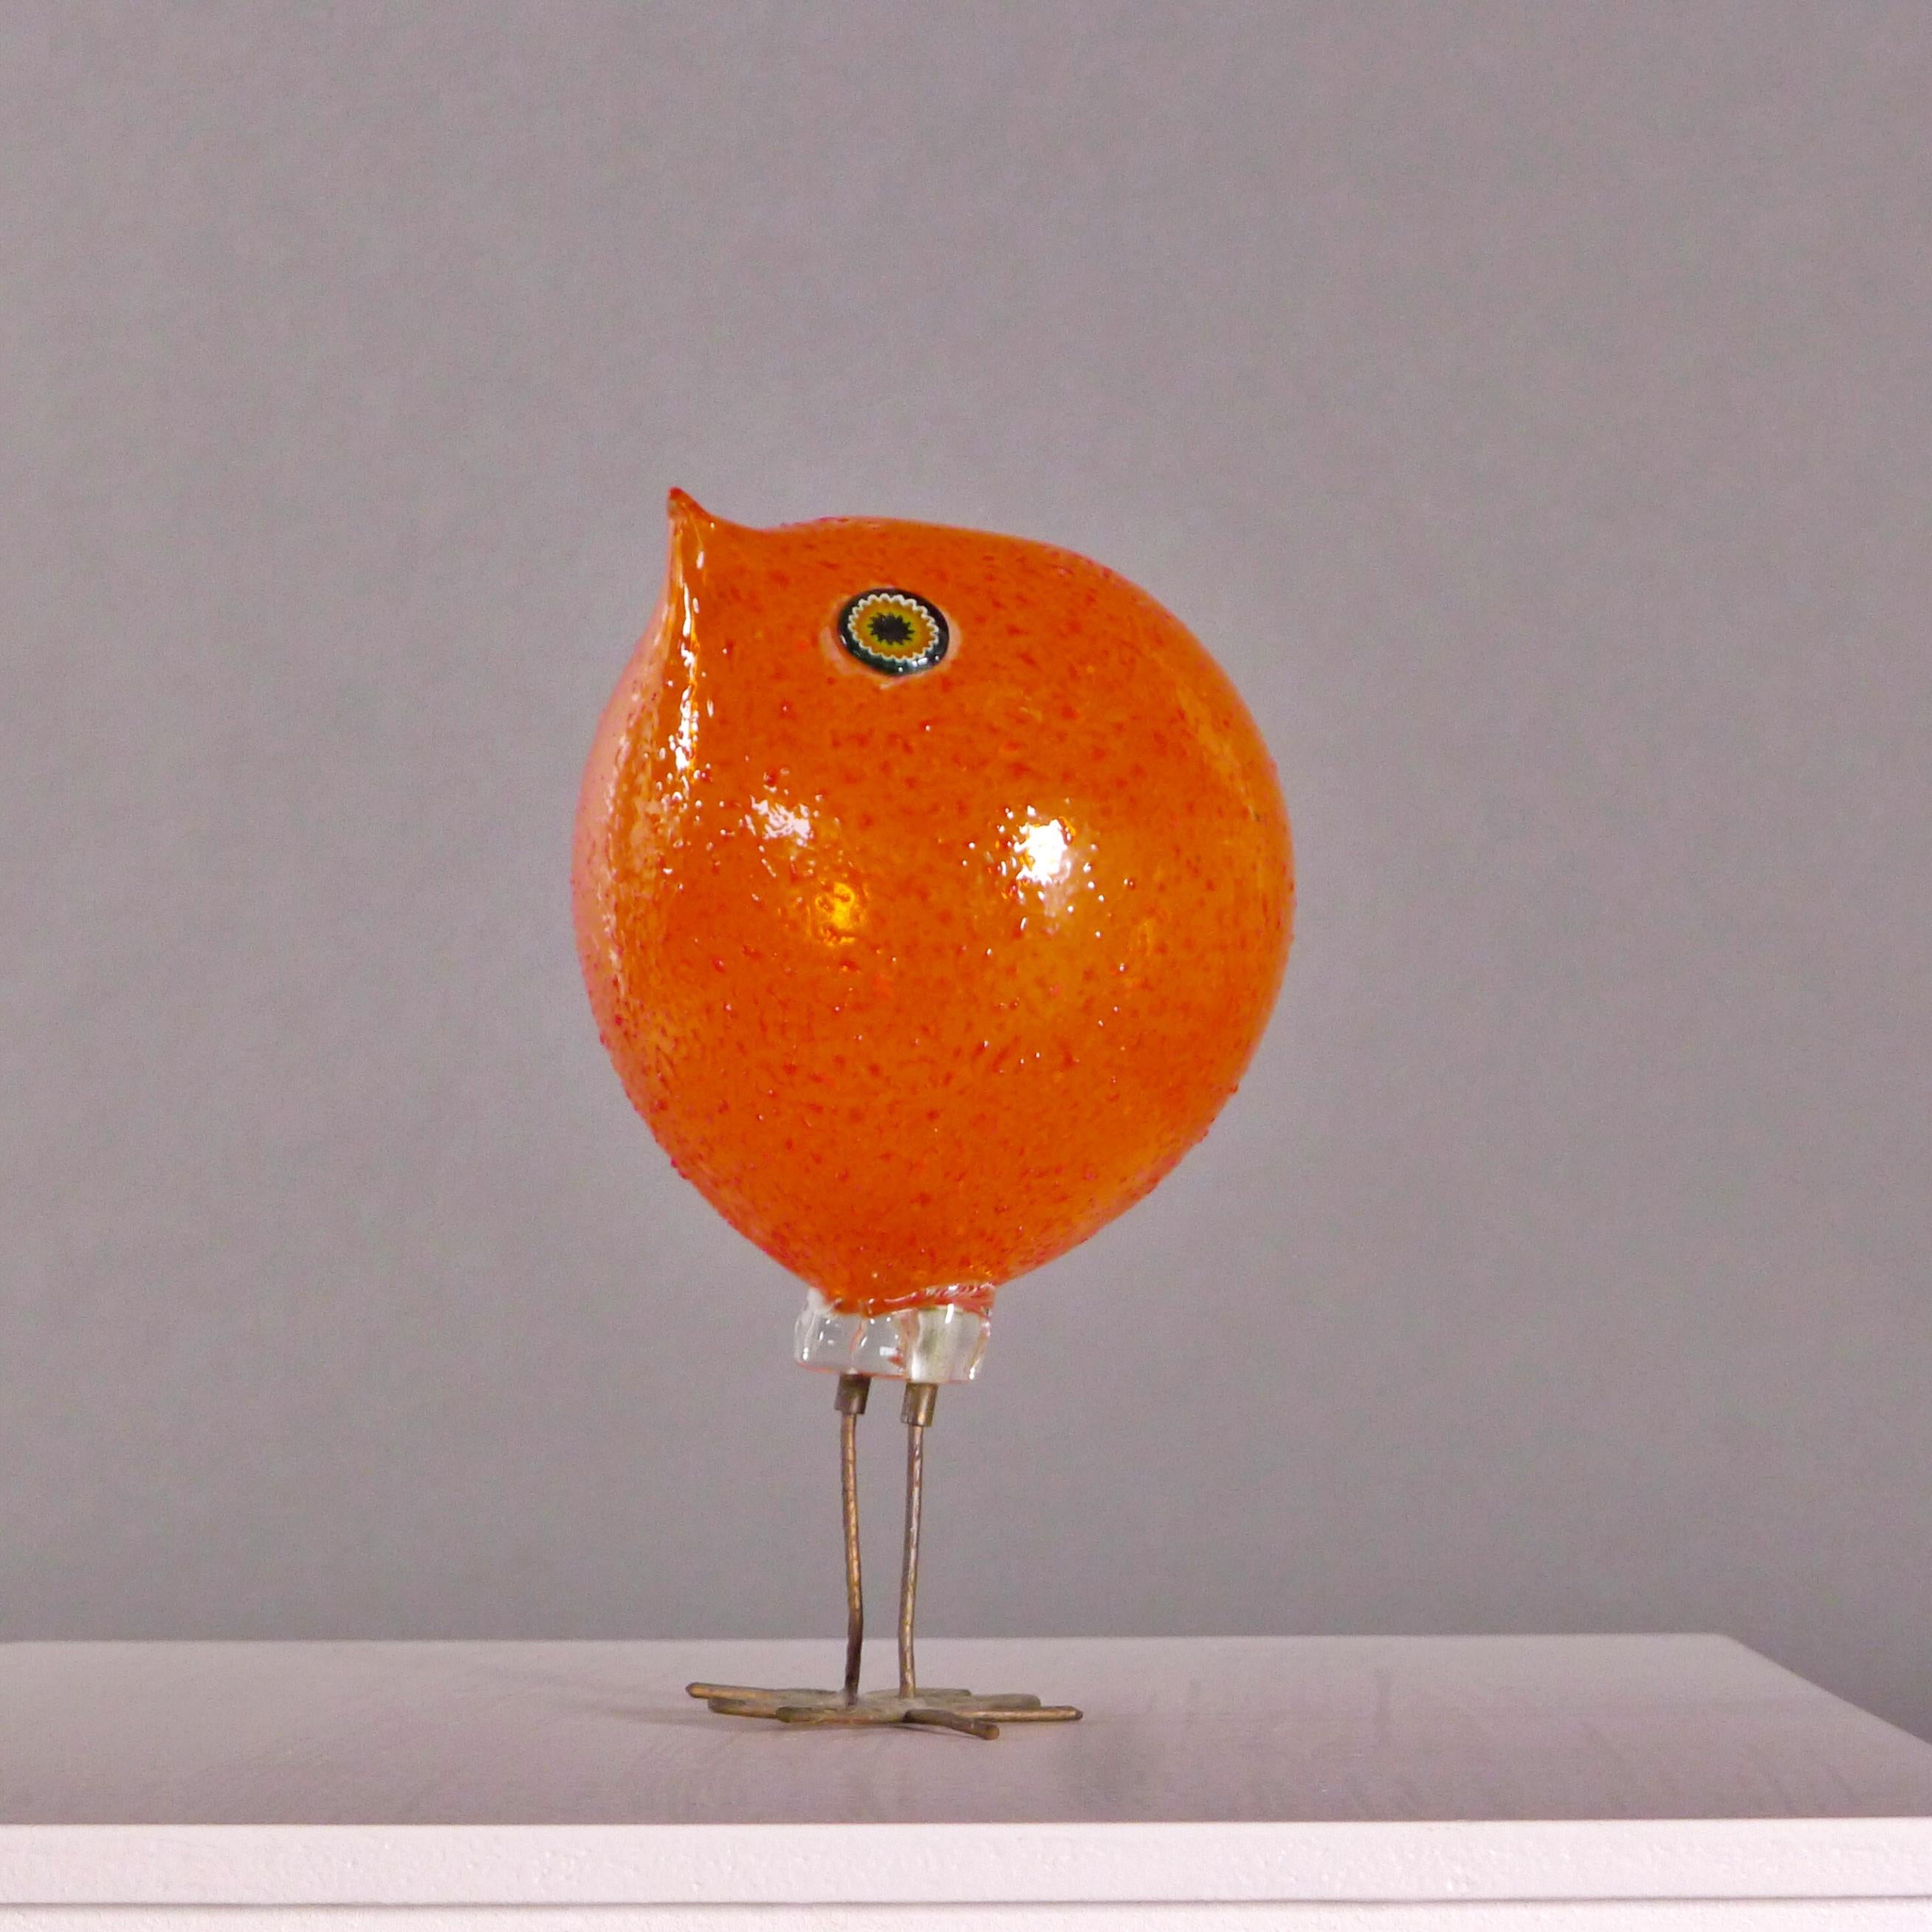 An instantly recognisable design, this delightful spiky orange 'pulcino' is one of a series of five glass birds created by Alessandro Pianon and made by the Vistosi glassworks on the island of Murano, off Venice, Italy in the 1960s.

The bird has a